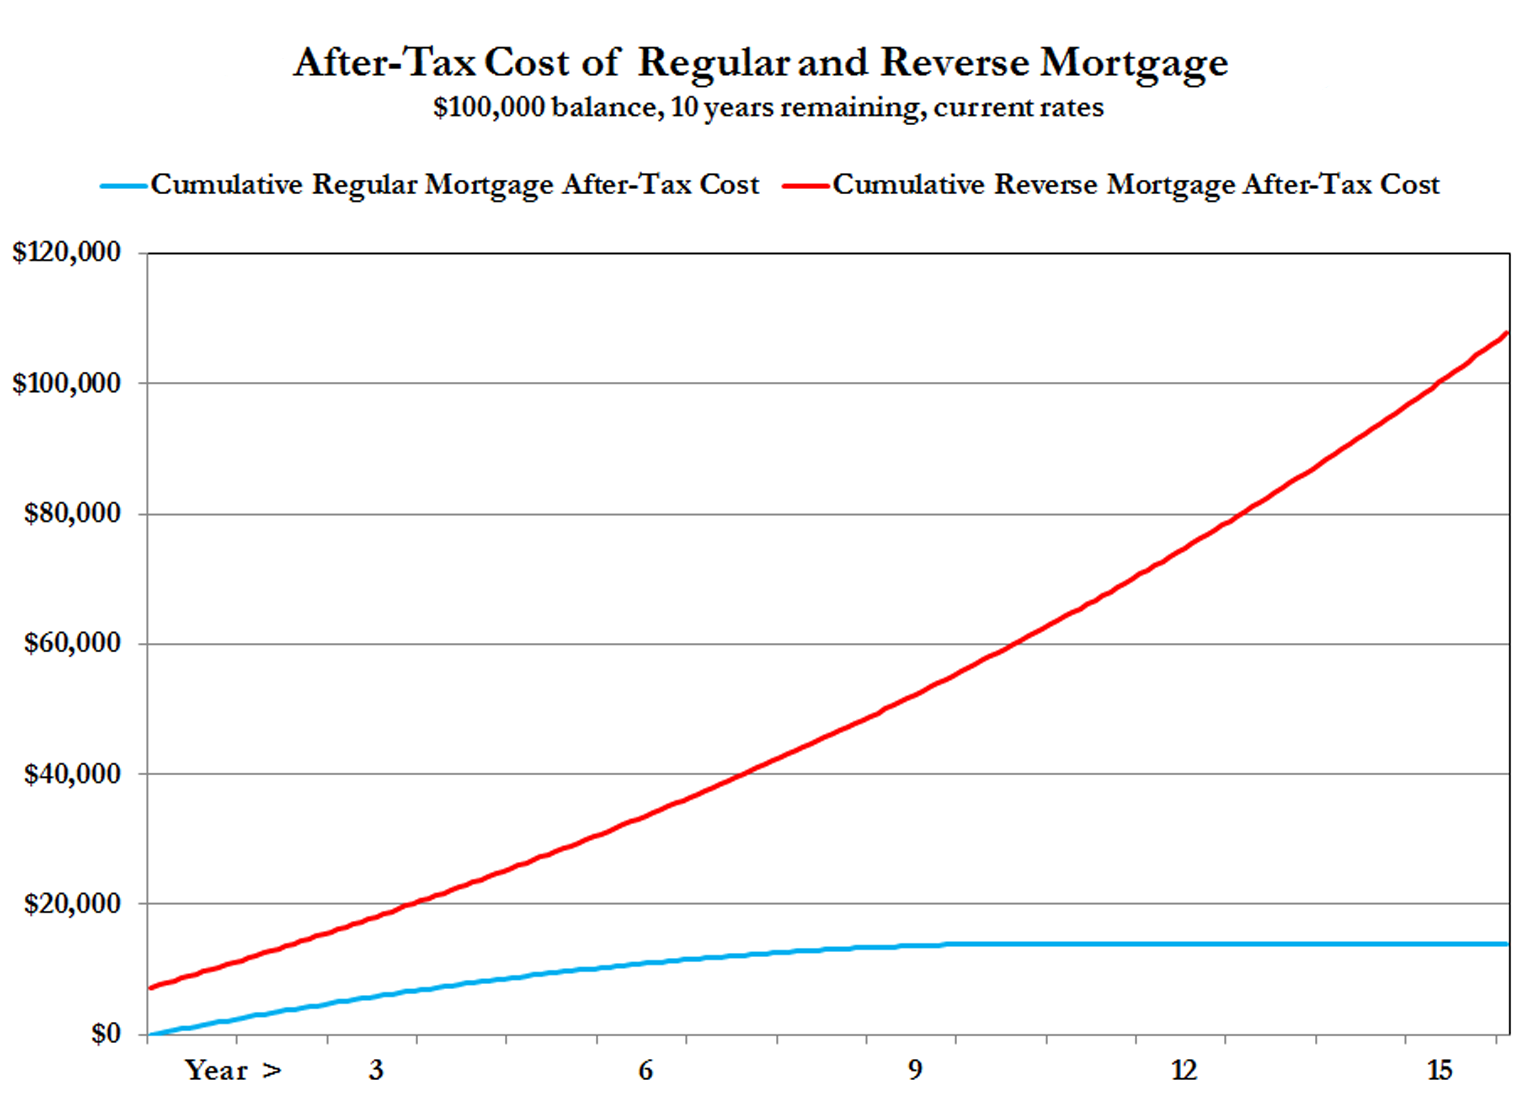 reverse mortgages cost vastly more than regular mortgages